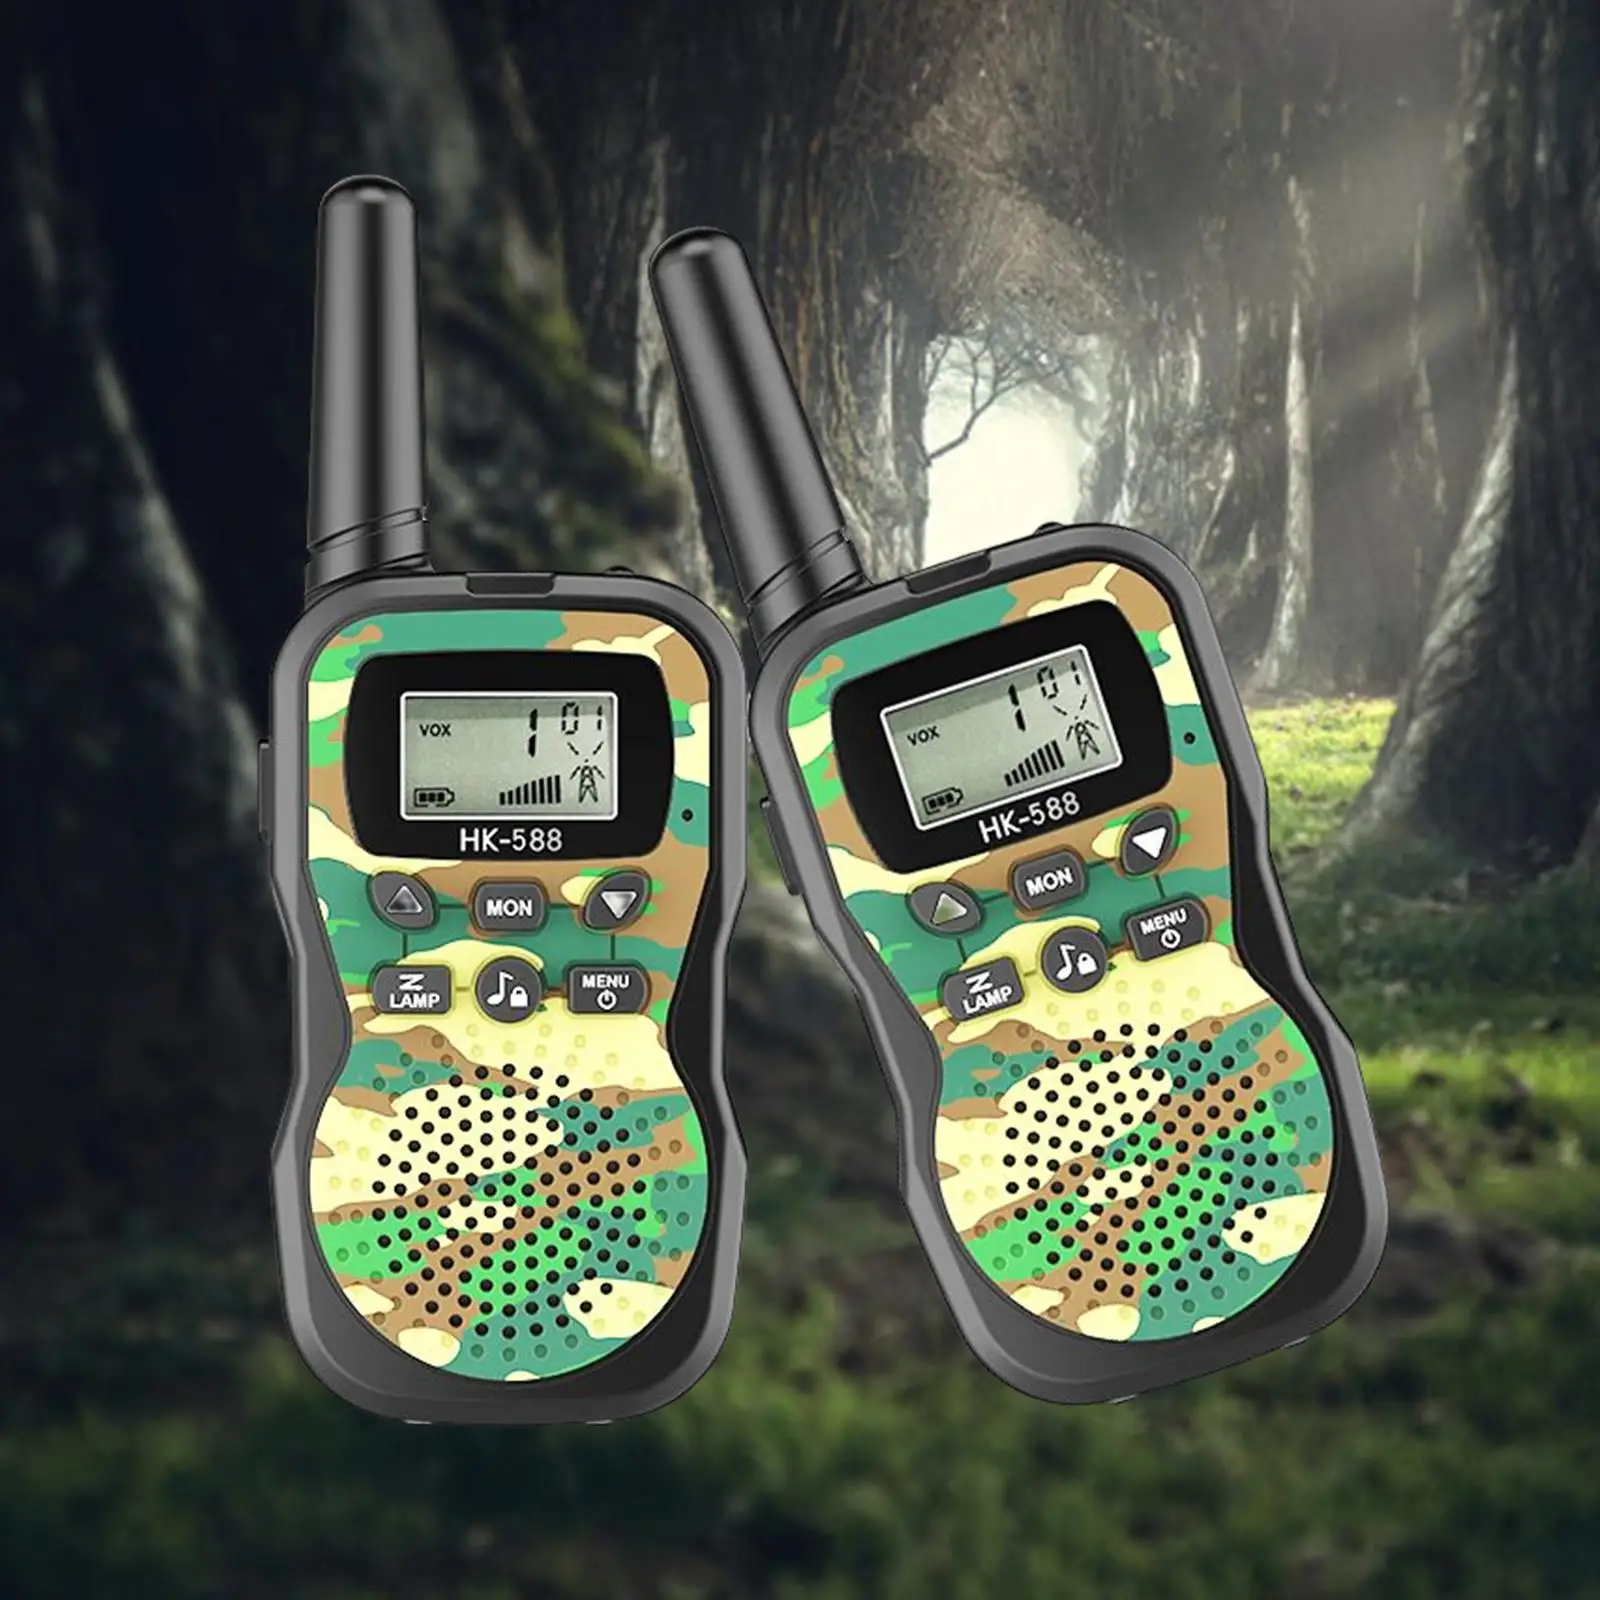 Portable Kids Walkie Toys Interphone Two Way Radios Durable with Backlit LCD